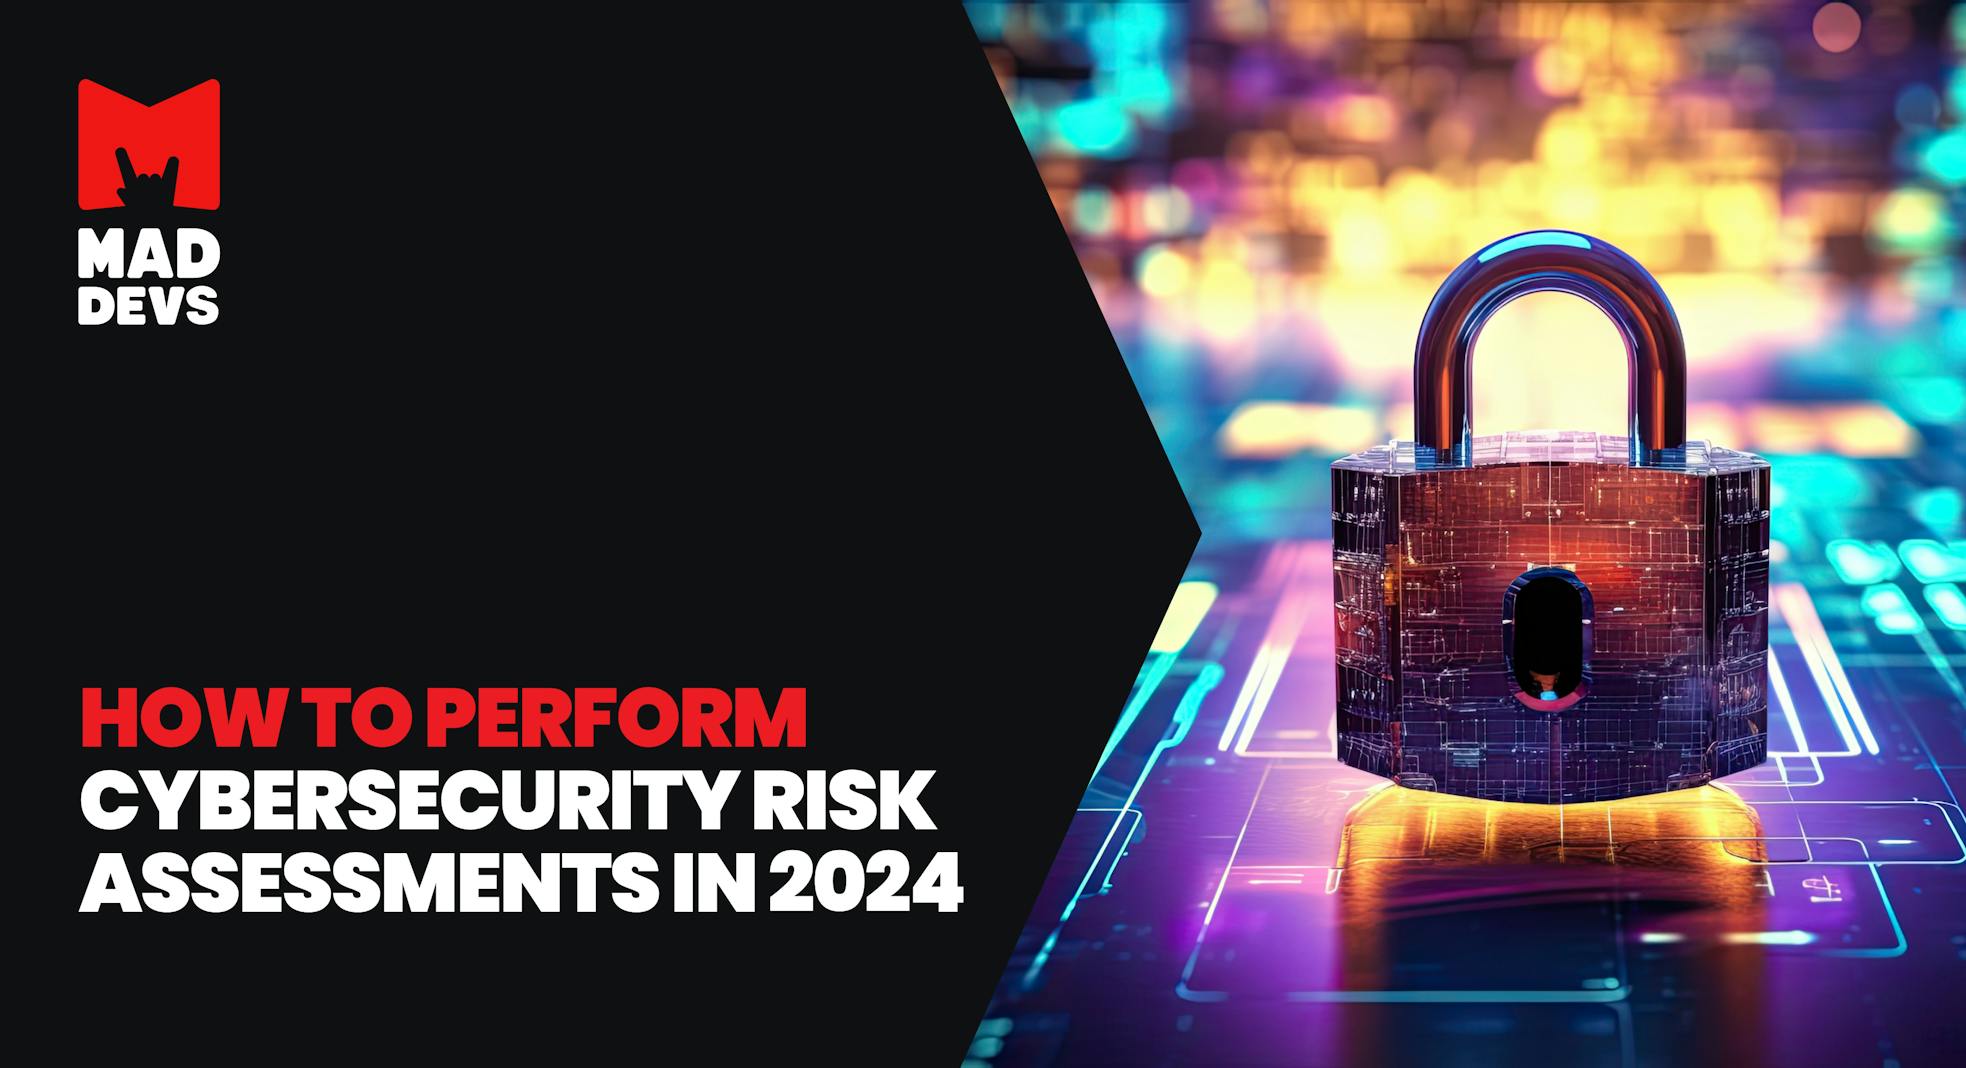 How To Perform a Cybersecurity Risk Assessment in 2024